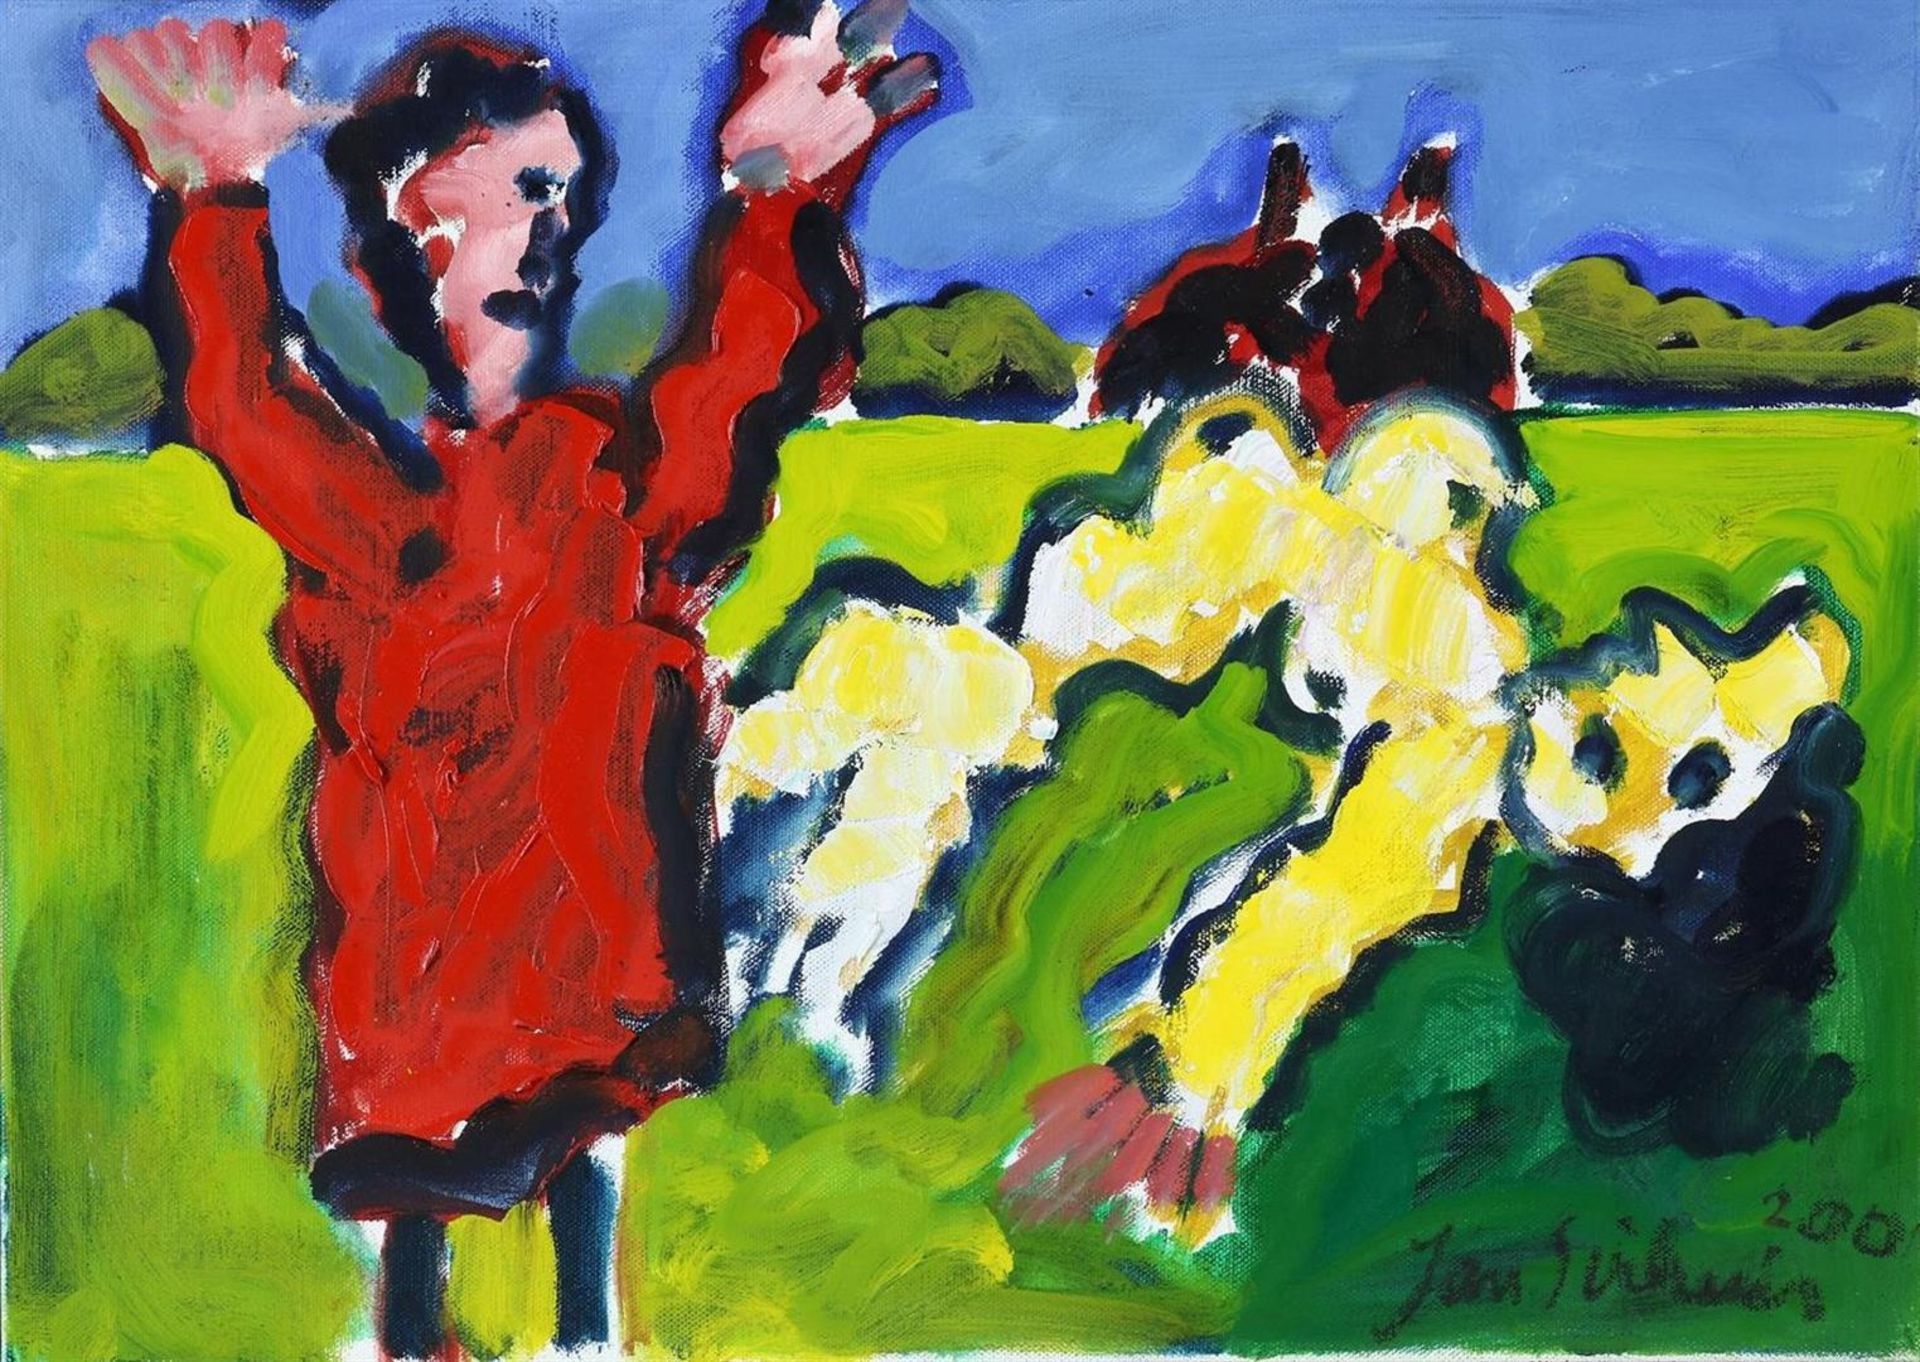 Jan Sierhuis (1928-2023) Figures in landscape, signed lower right and dated 2000, canvas 50 x 70